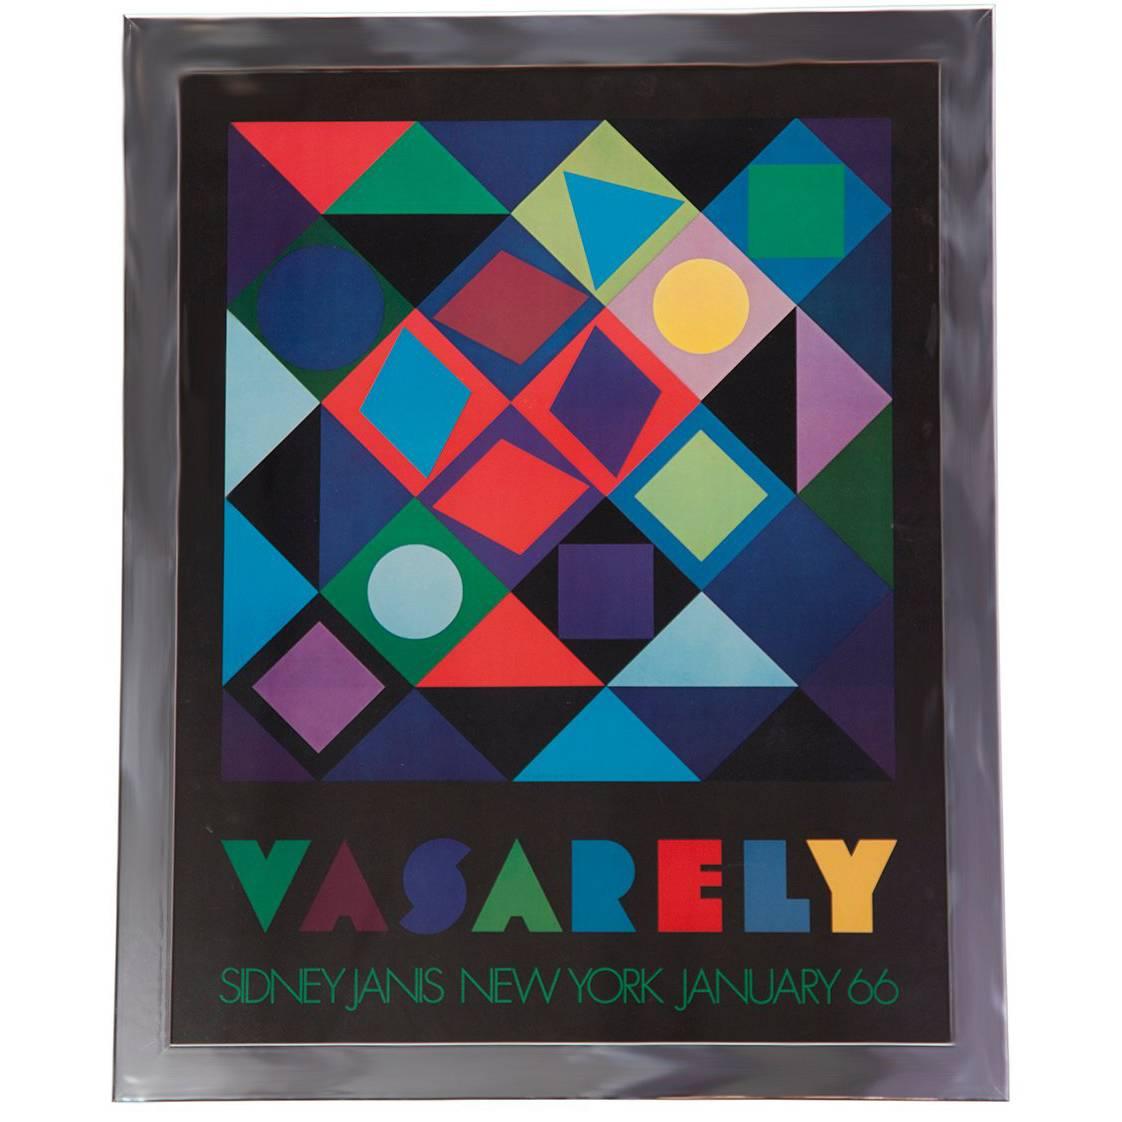 1960s Vasarely Poster in Chrome Frame For Sale